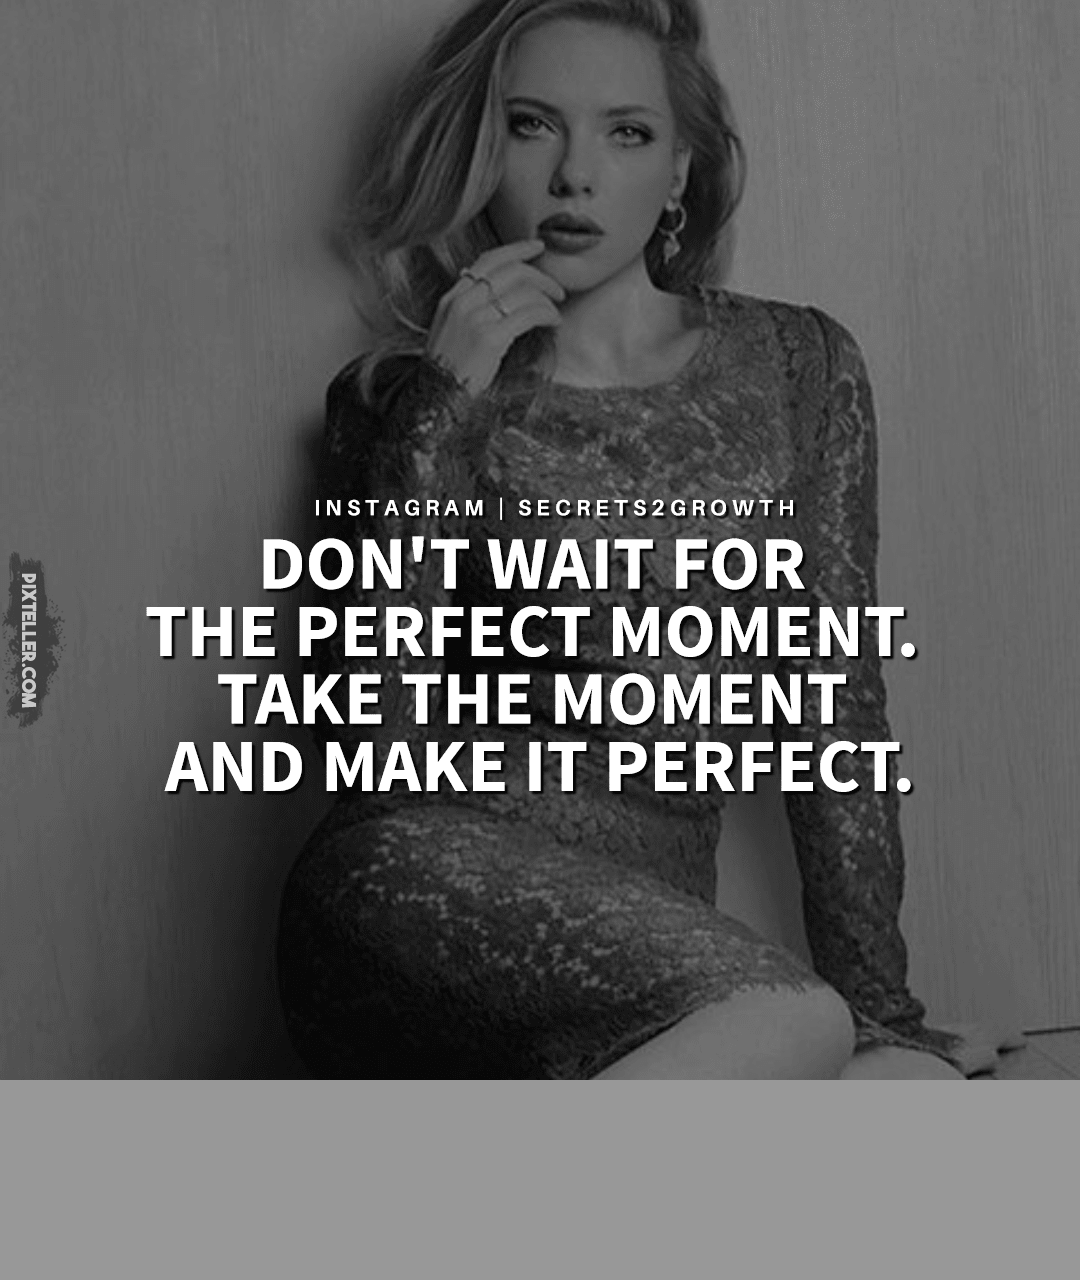 DON'T WAIT FOR THE PERFECT MOMENT. Design 